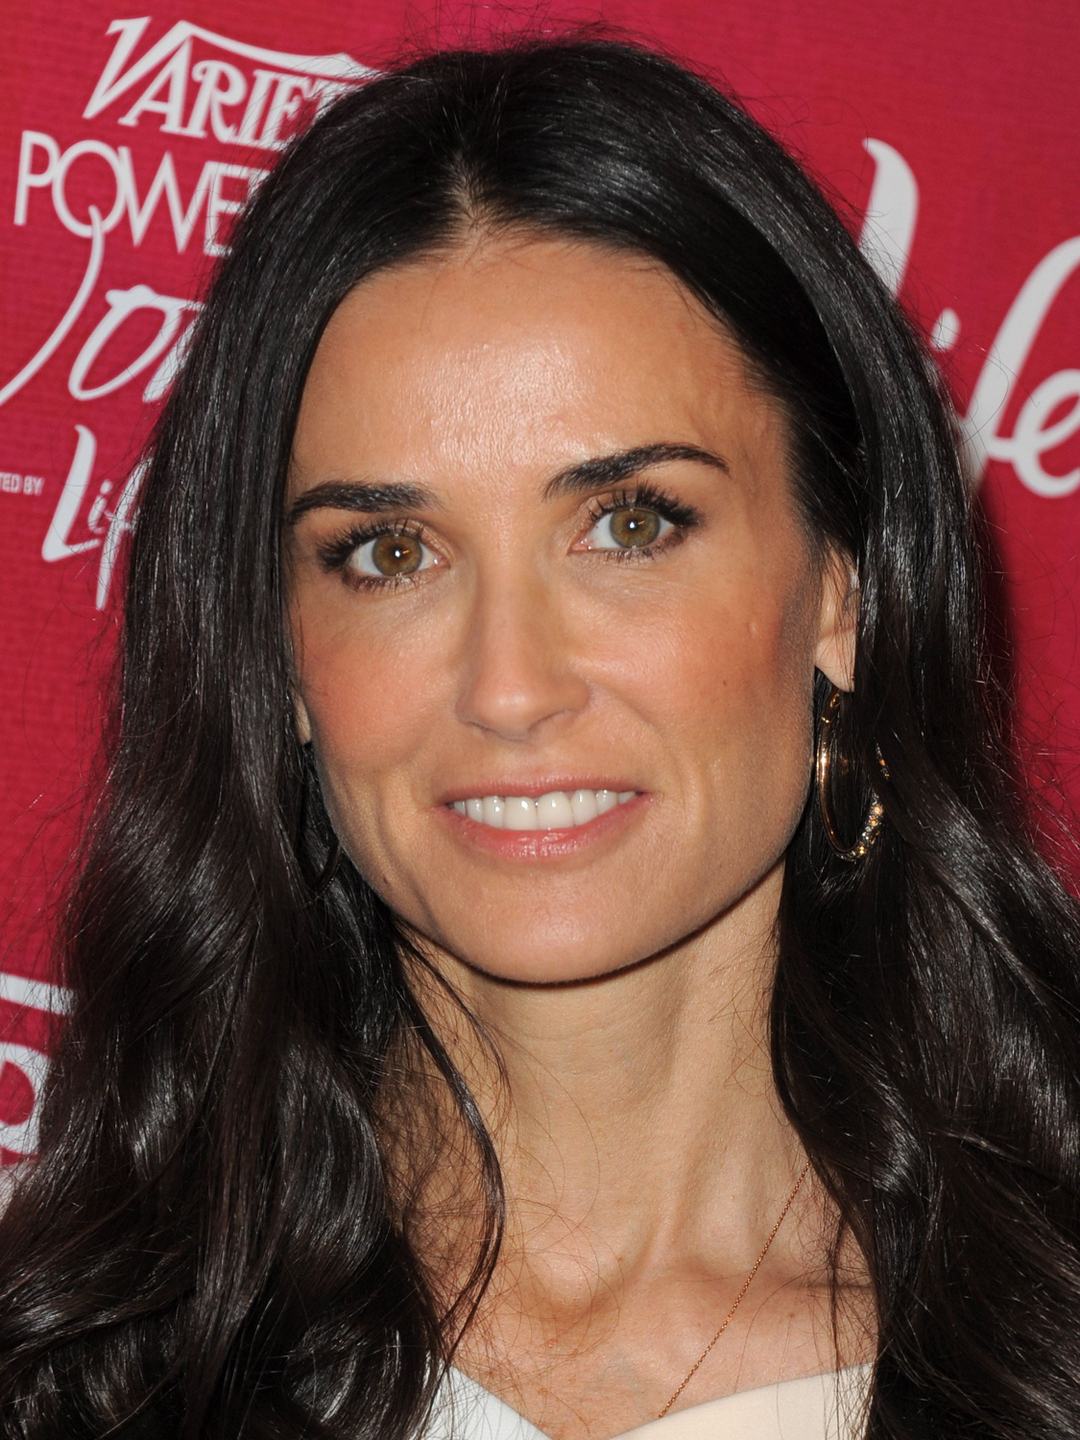 Demi Moore dating history